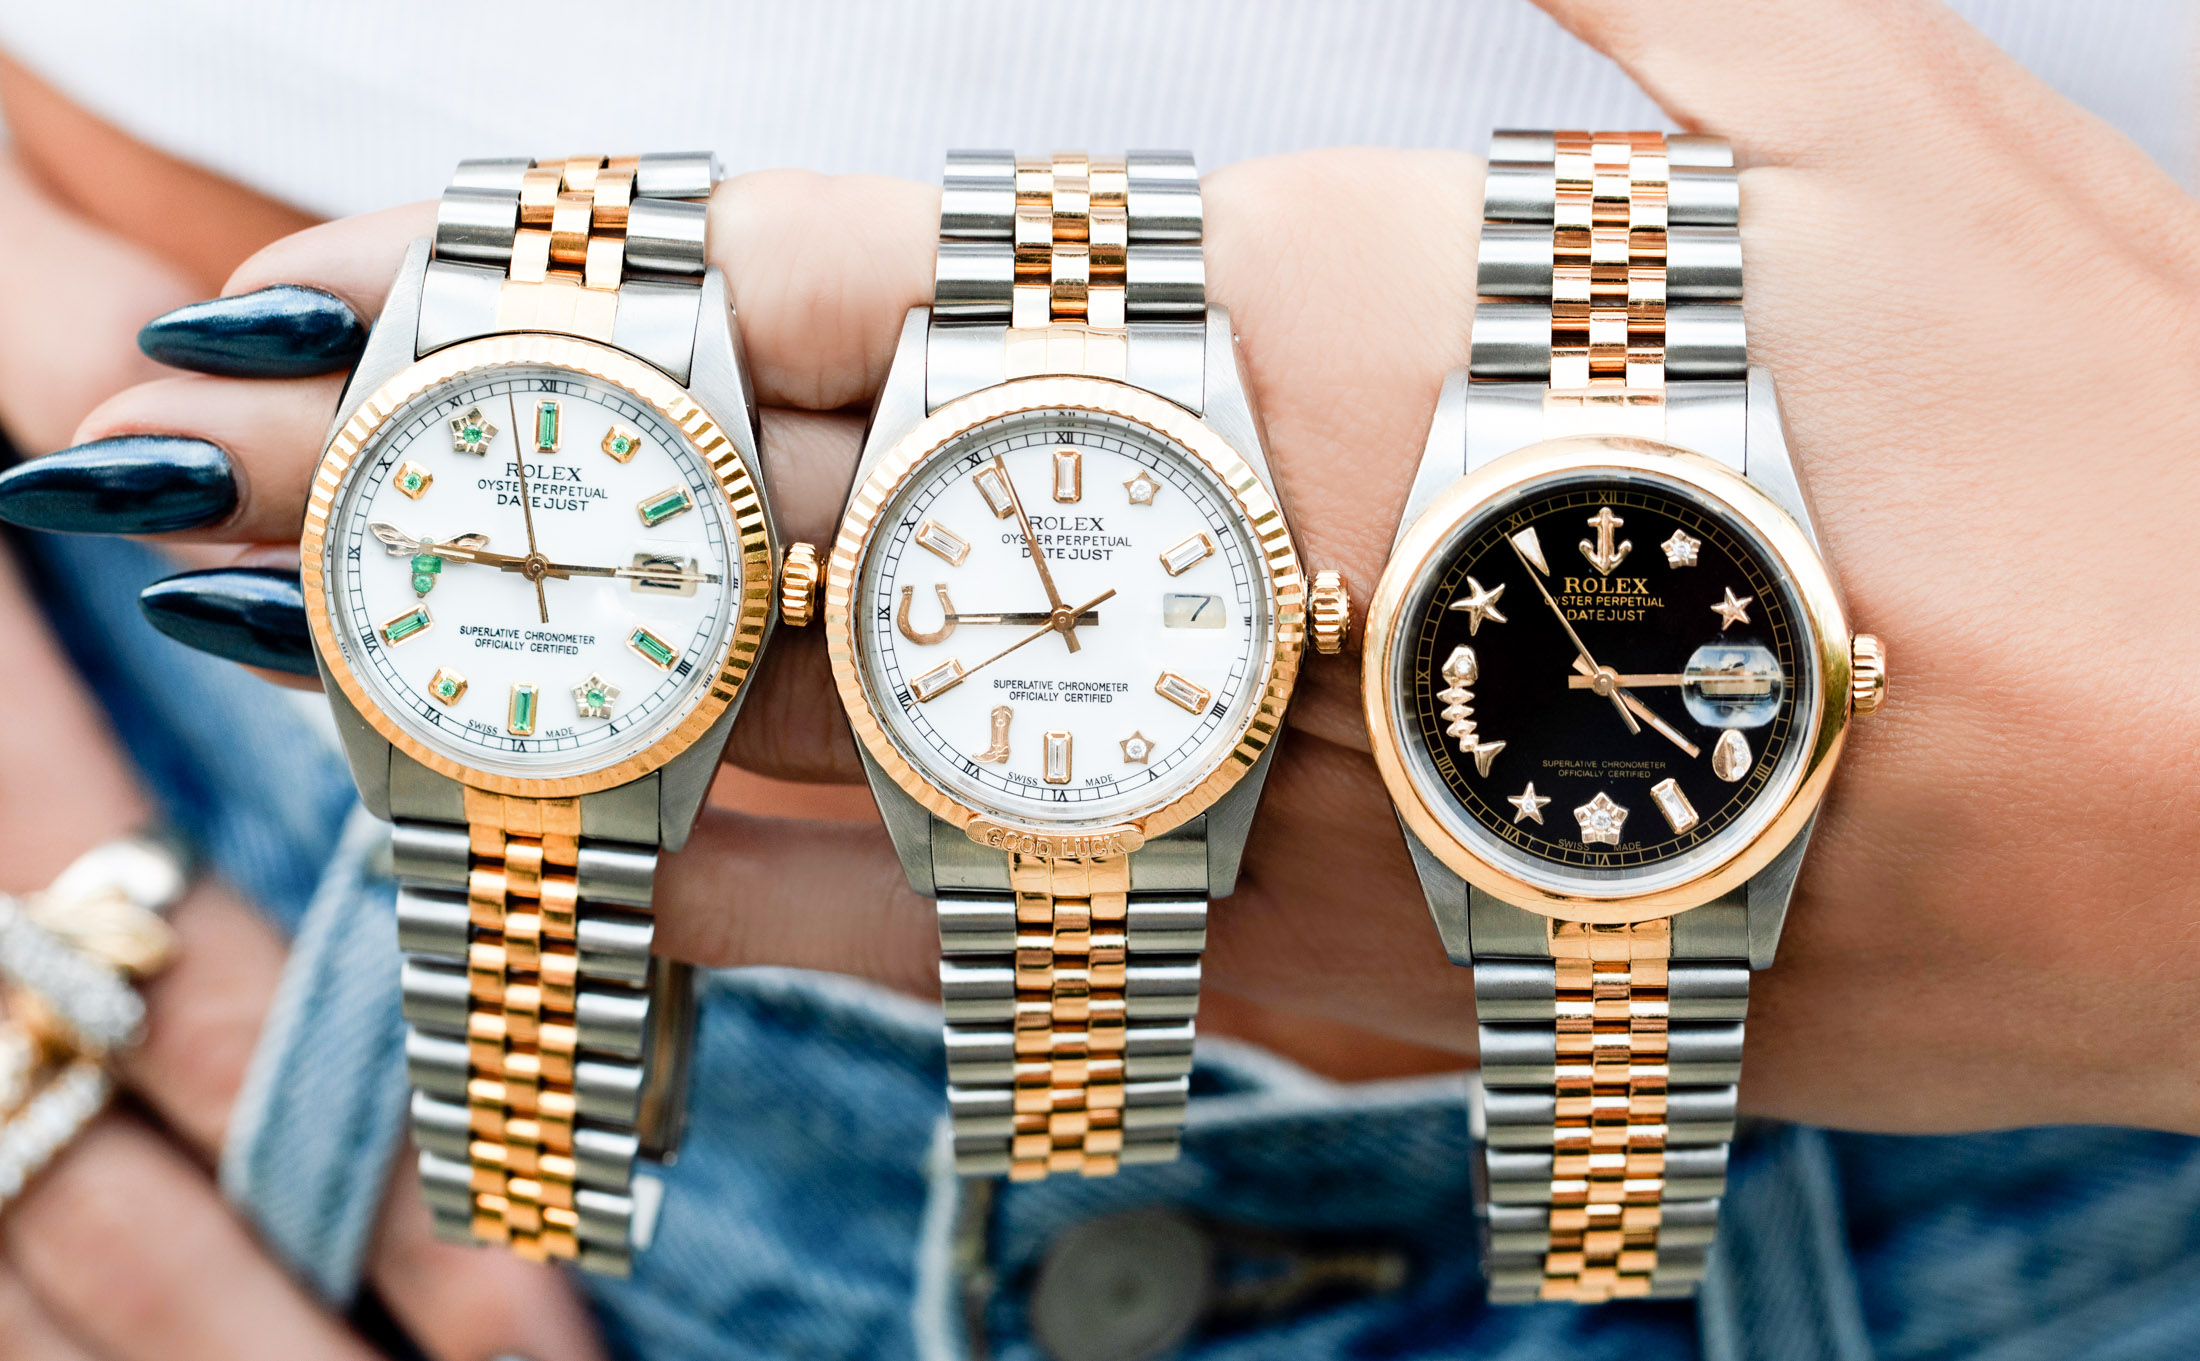 Would You Buy a Modified Rolex? Designer Adds Emeralds to Watches